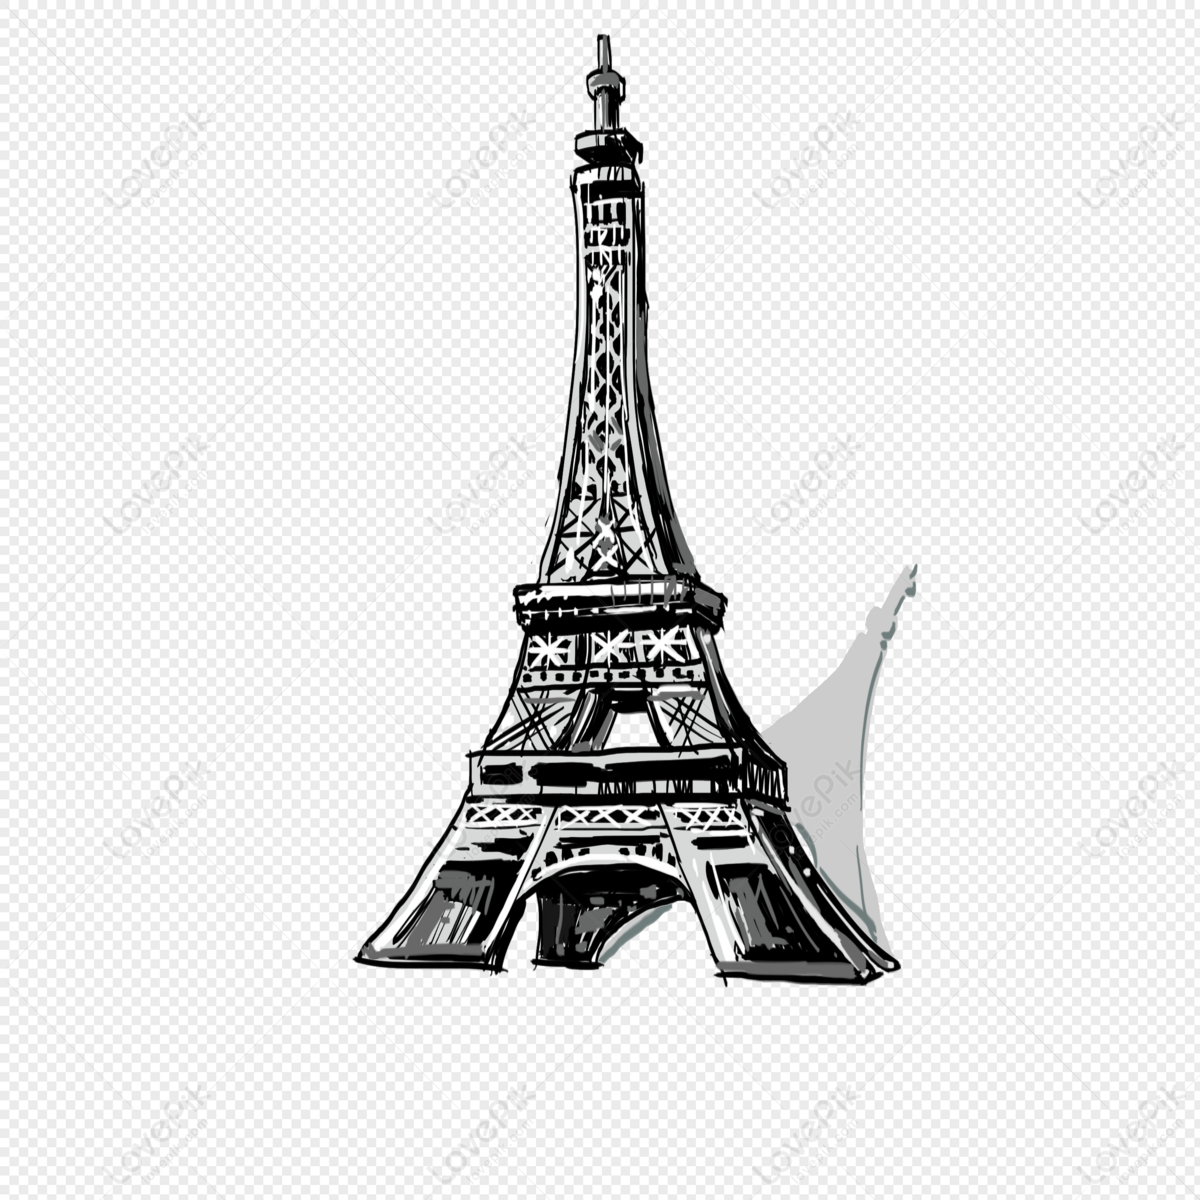 Eiffel tower, black silver, black white, silver tower png hd transparent image